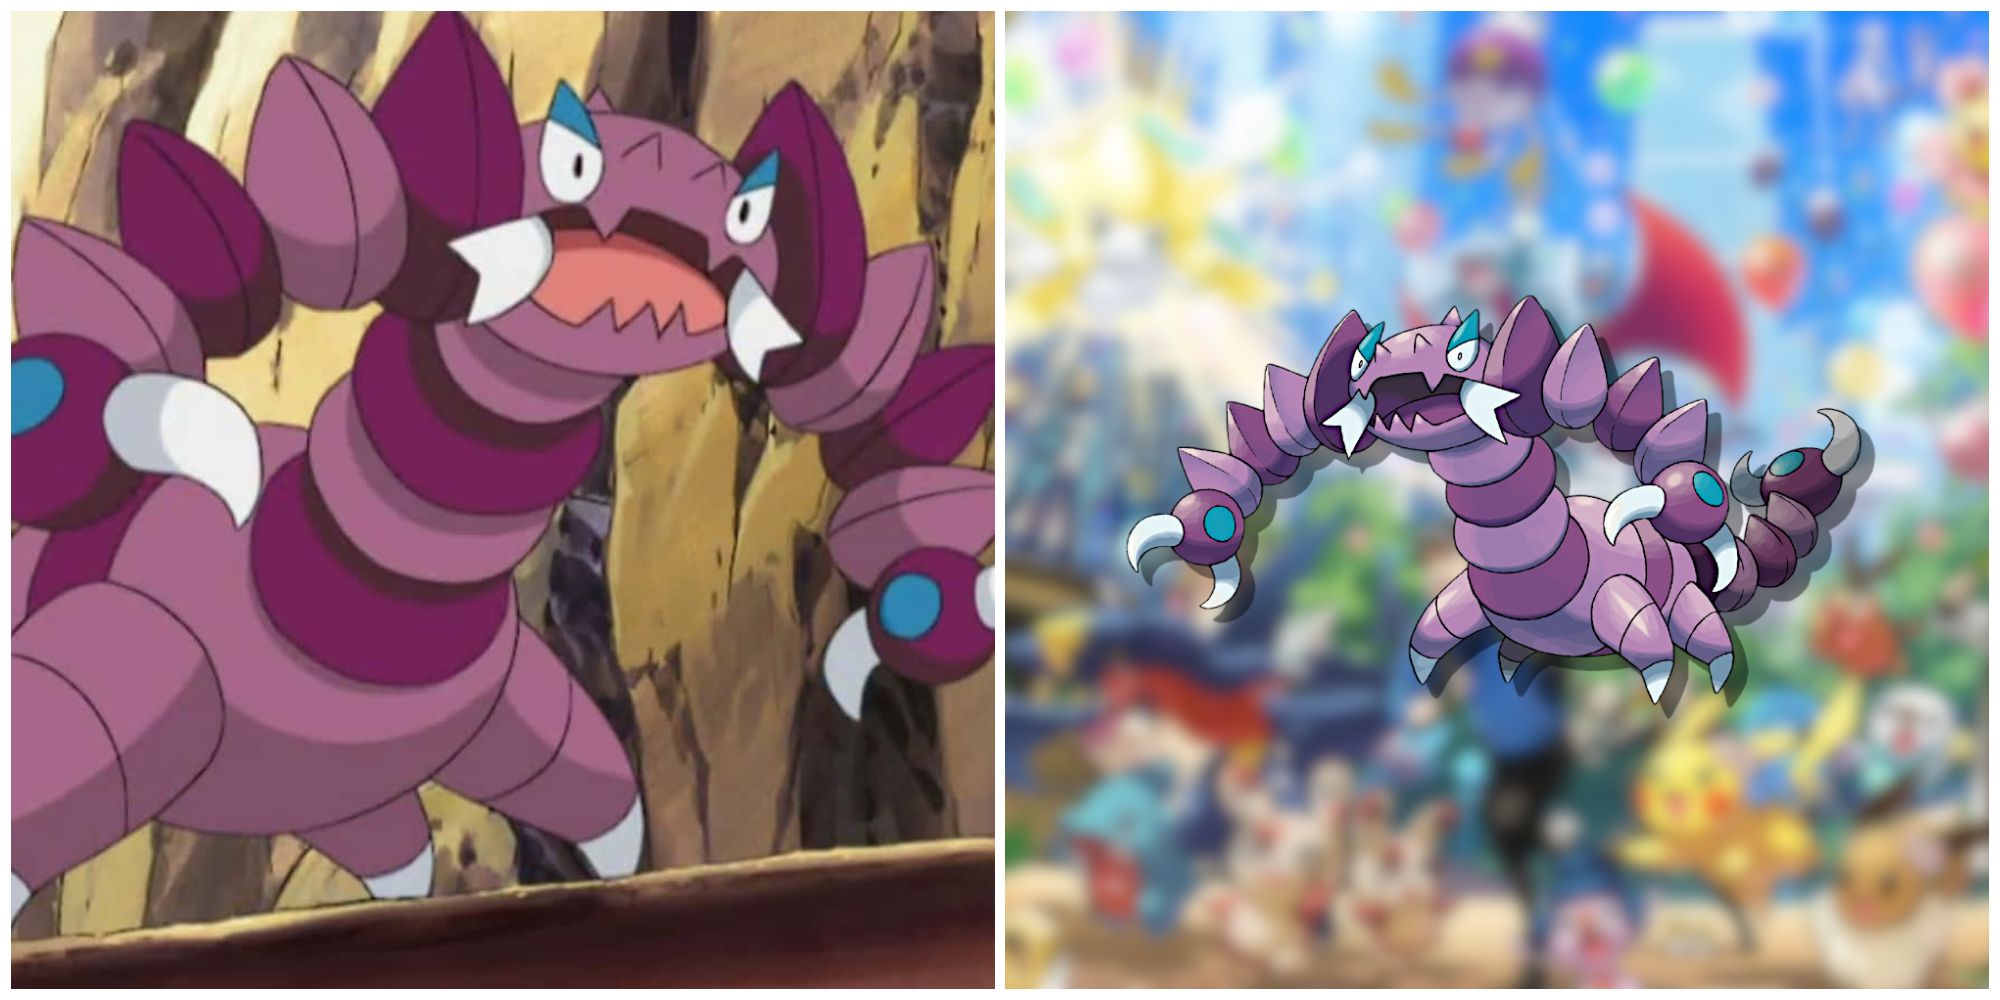 Split image of Drapion in the Pokemon anime and Drapion in the foreground from Pokemon GO